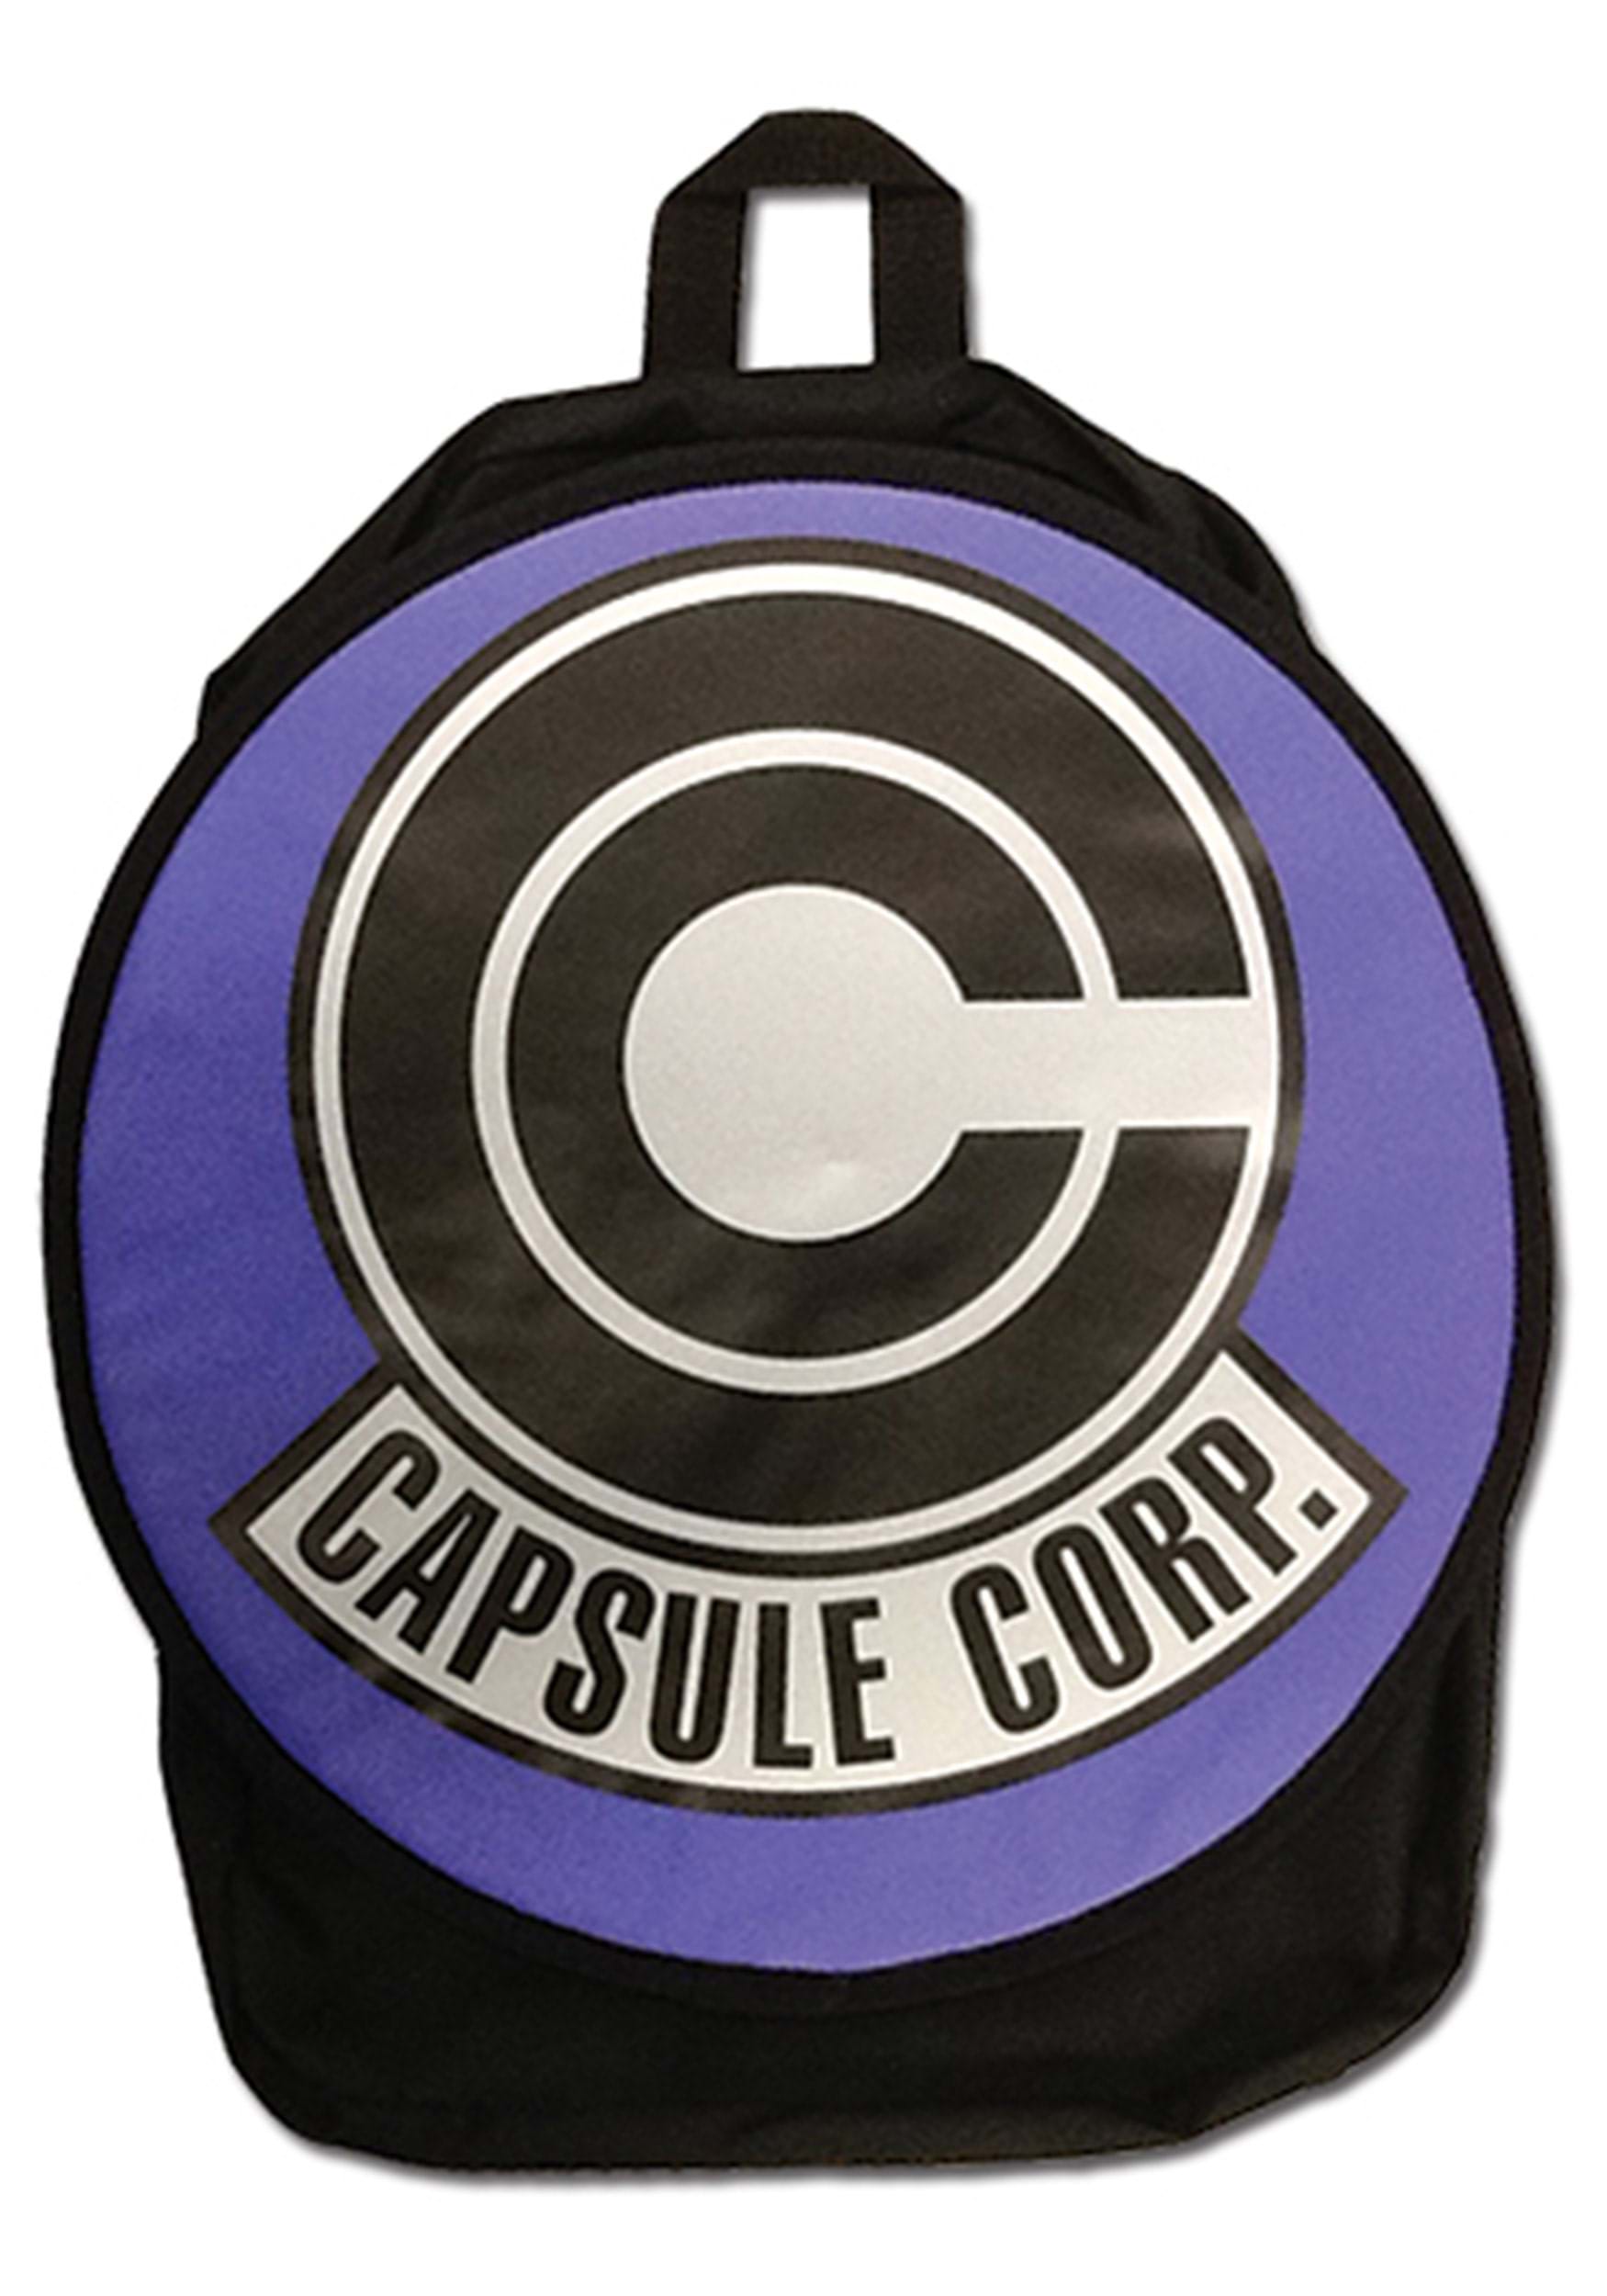 Capsule Corp. Backpack from Dragon Ball Z